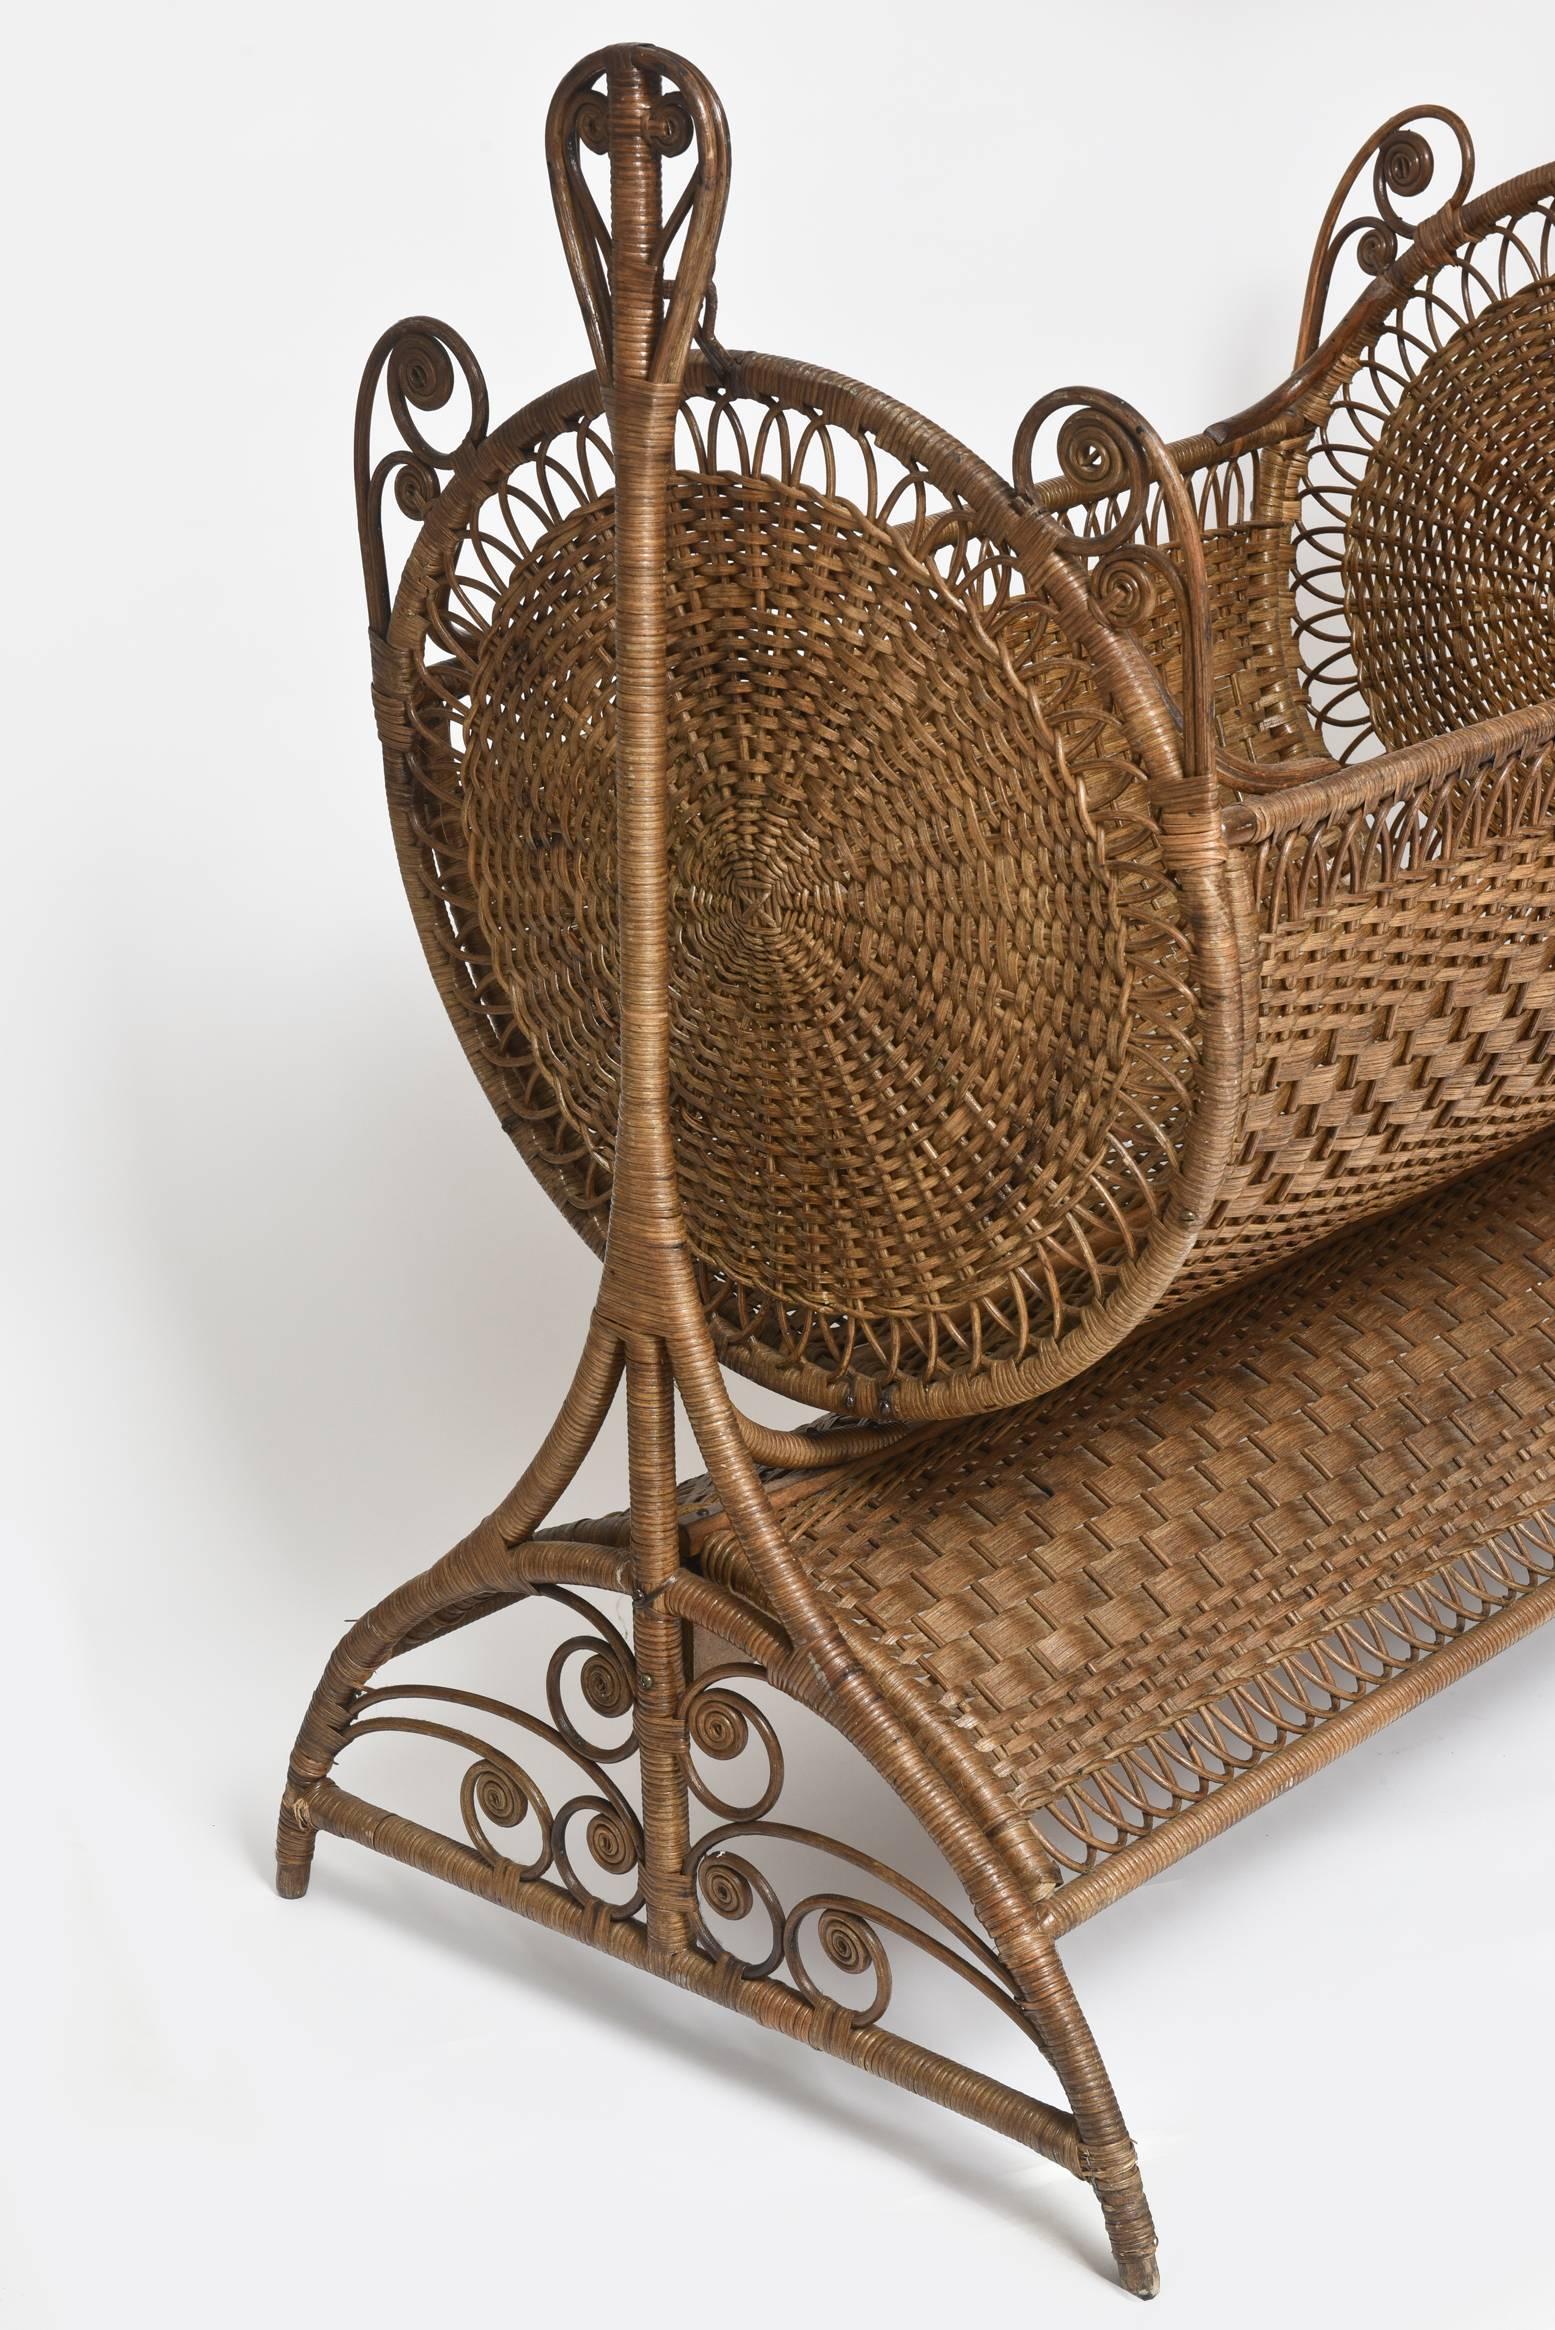 The crib includes a detachable wicker crown which holds mosquito netting to be draped over the cradle as a canopy to protect the baby from insect bites. (The swinging cradle is held by two brass joints and sits on a four-legged base.) It is tightly